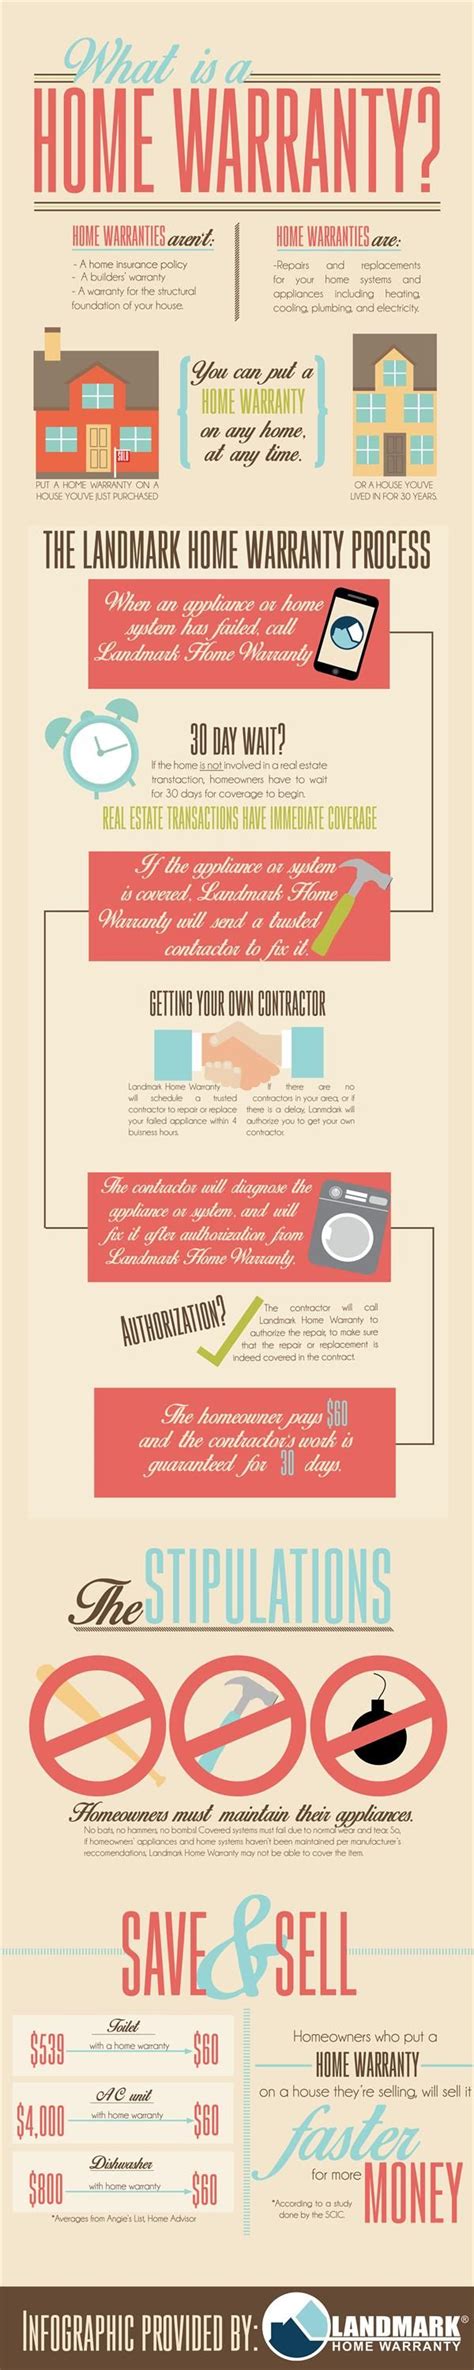 What Is A Home Warranty Infographic Home Warranty Infographic